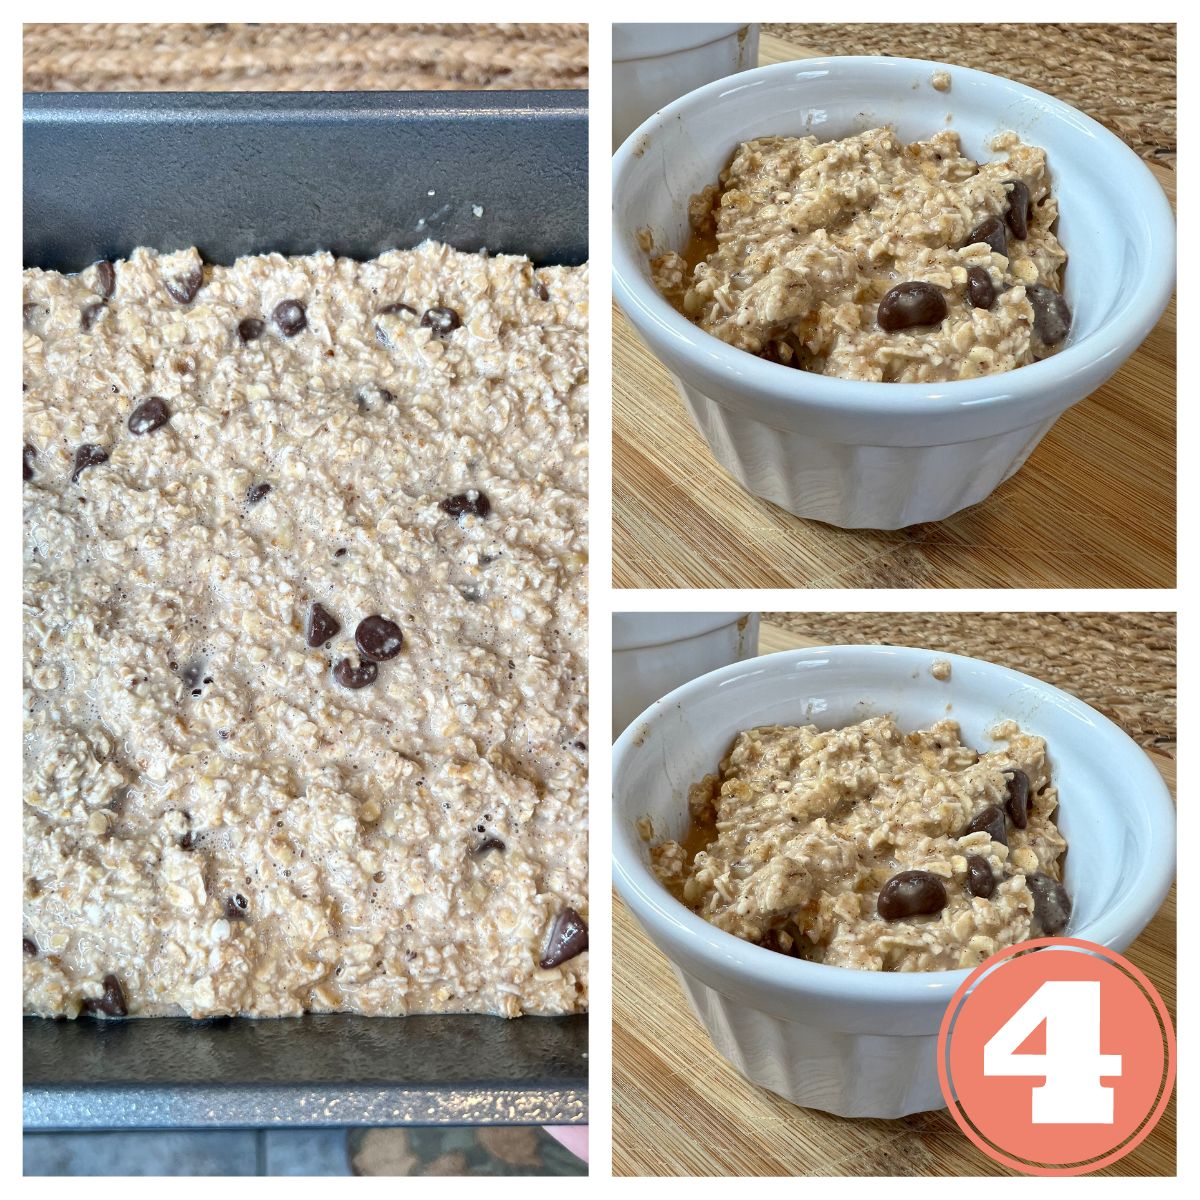 Baked Oatmeal with nuts in a baking pan and in a white ramekin